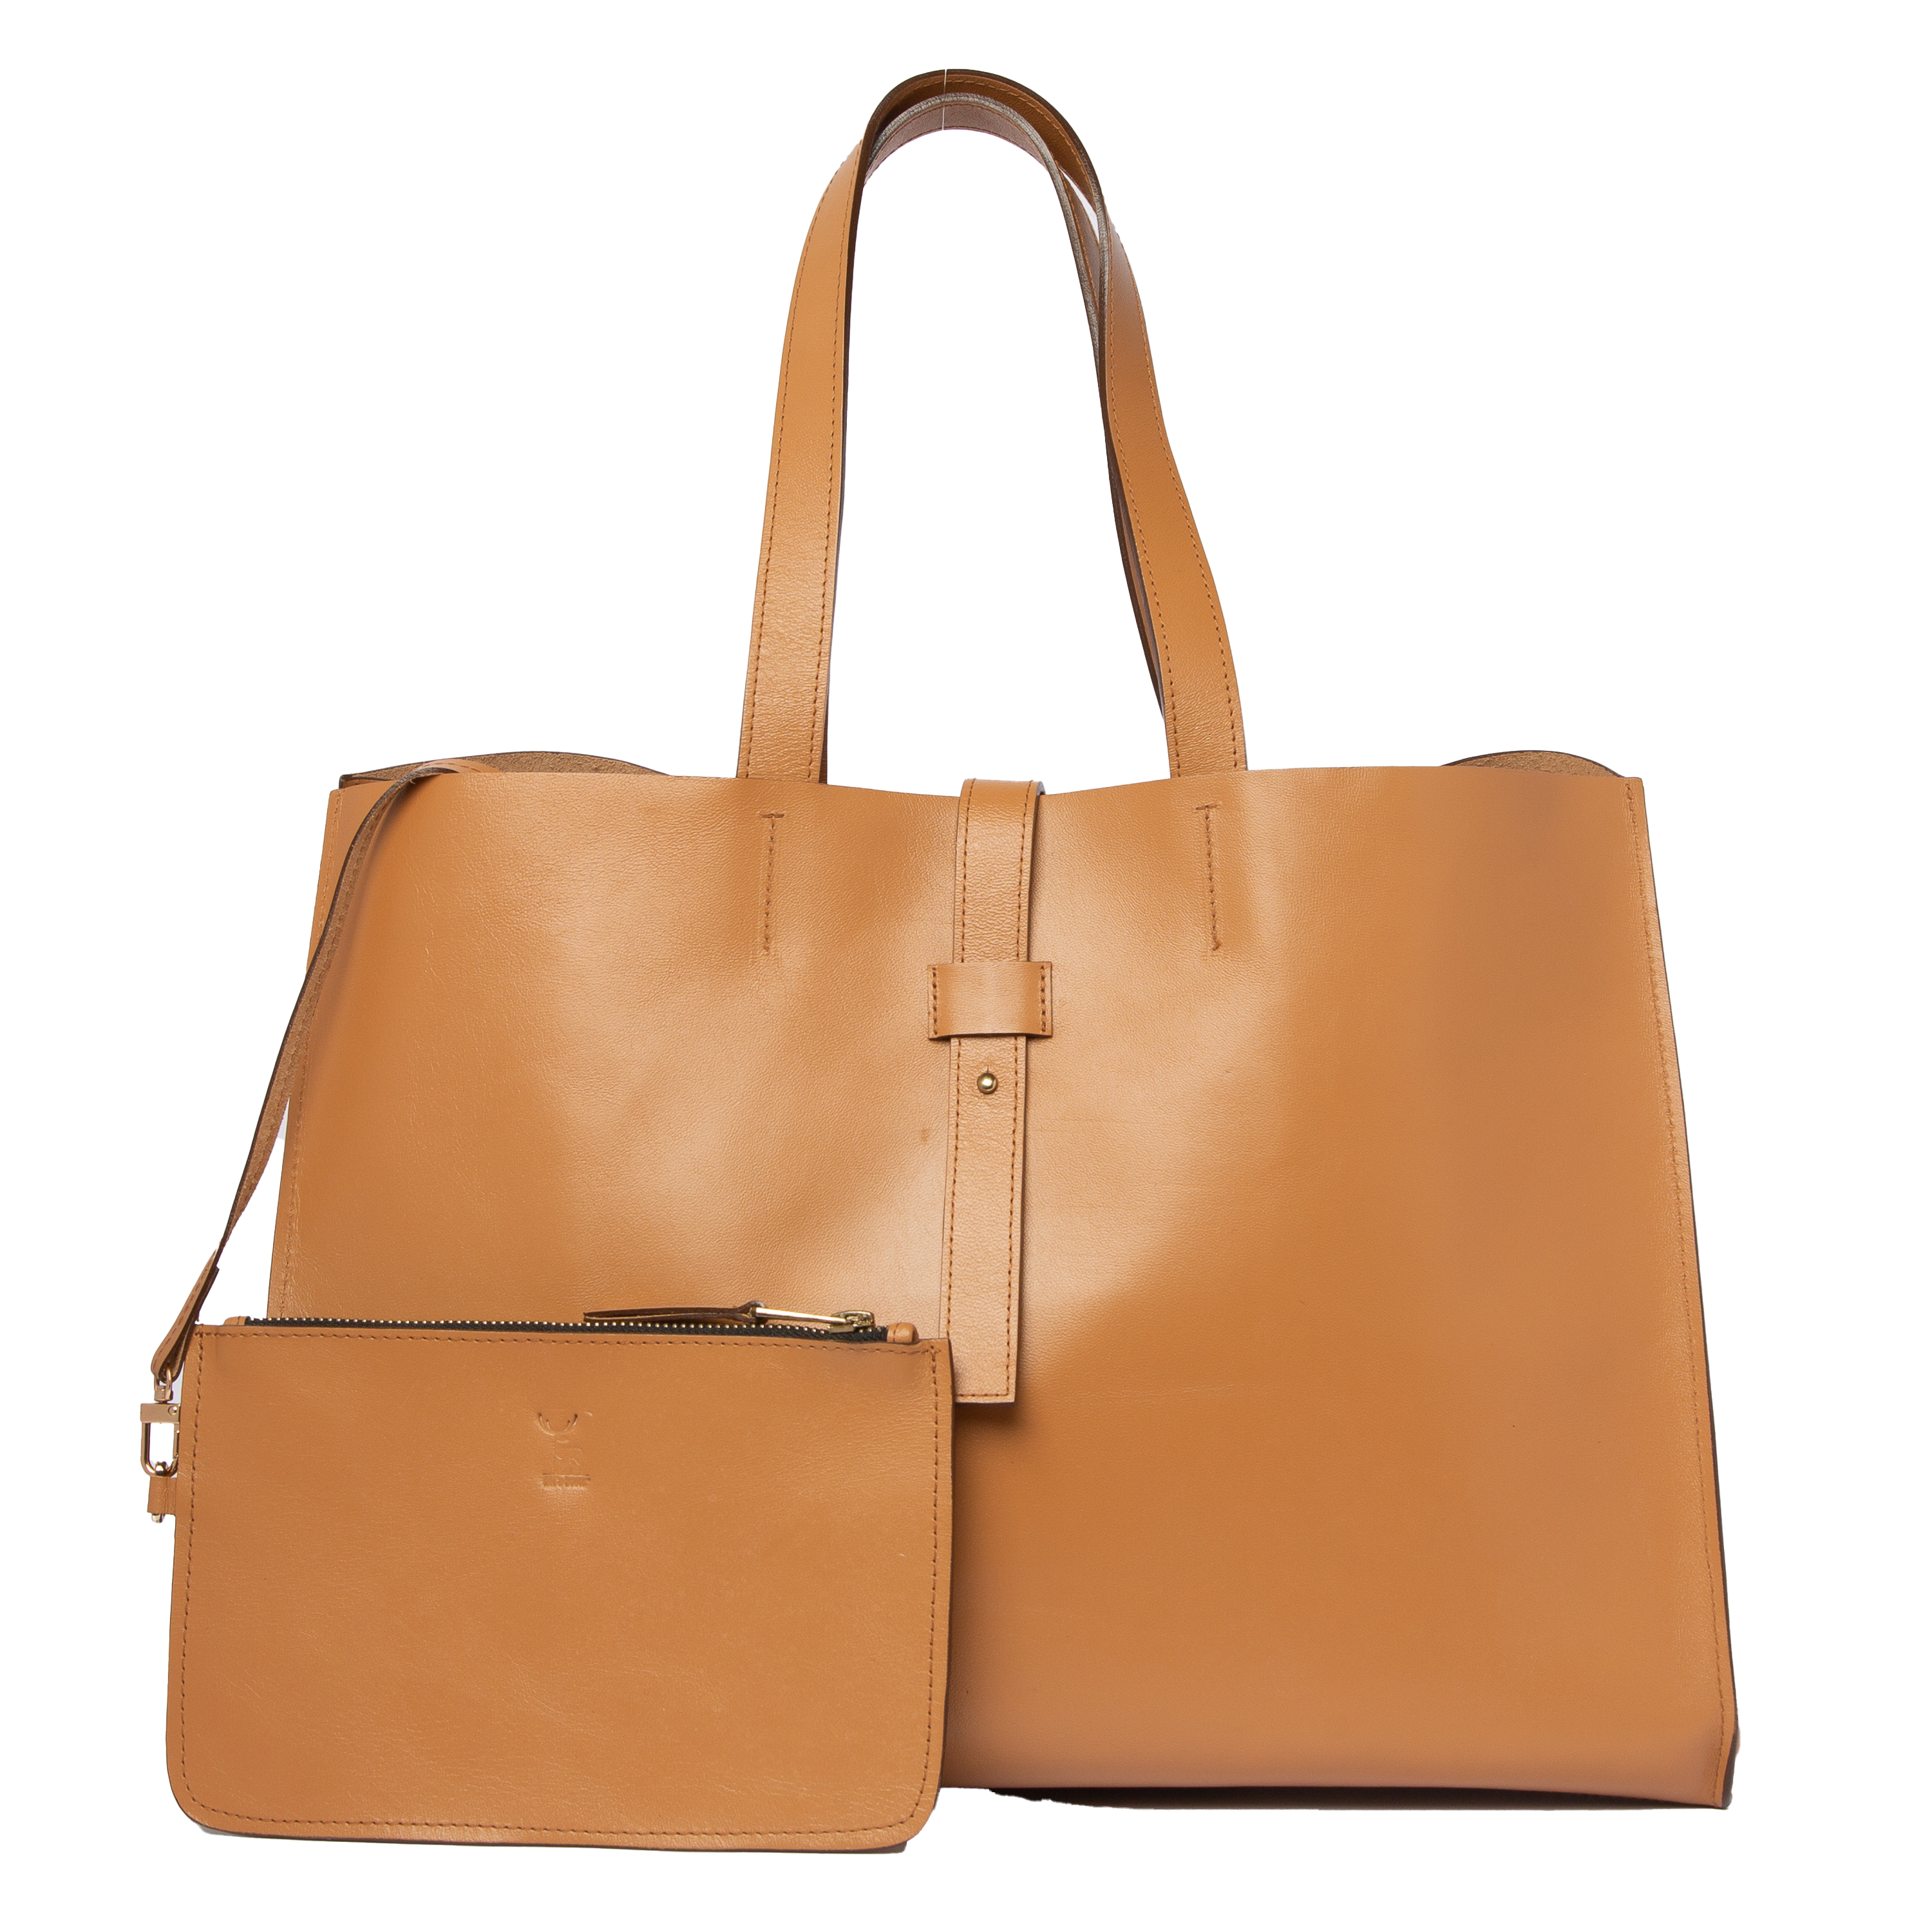 CARRY ALL LEATHER TOTE